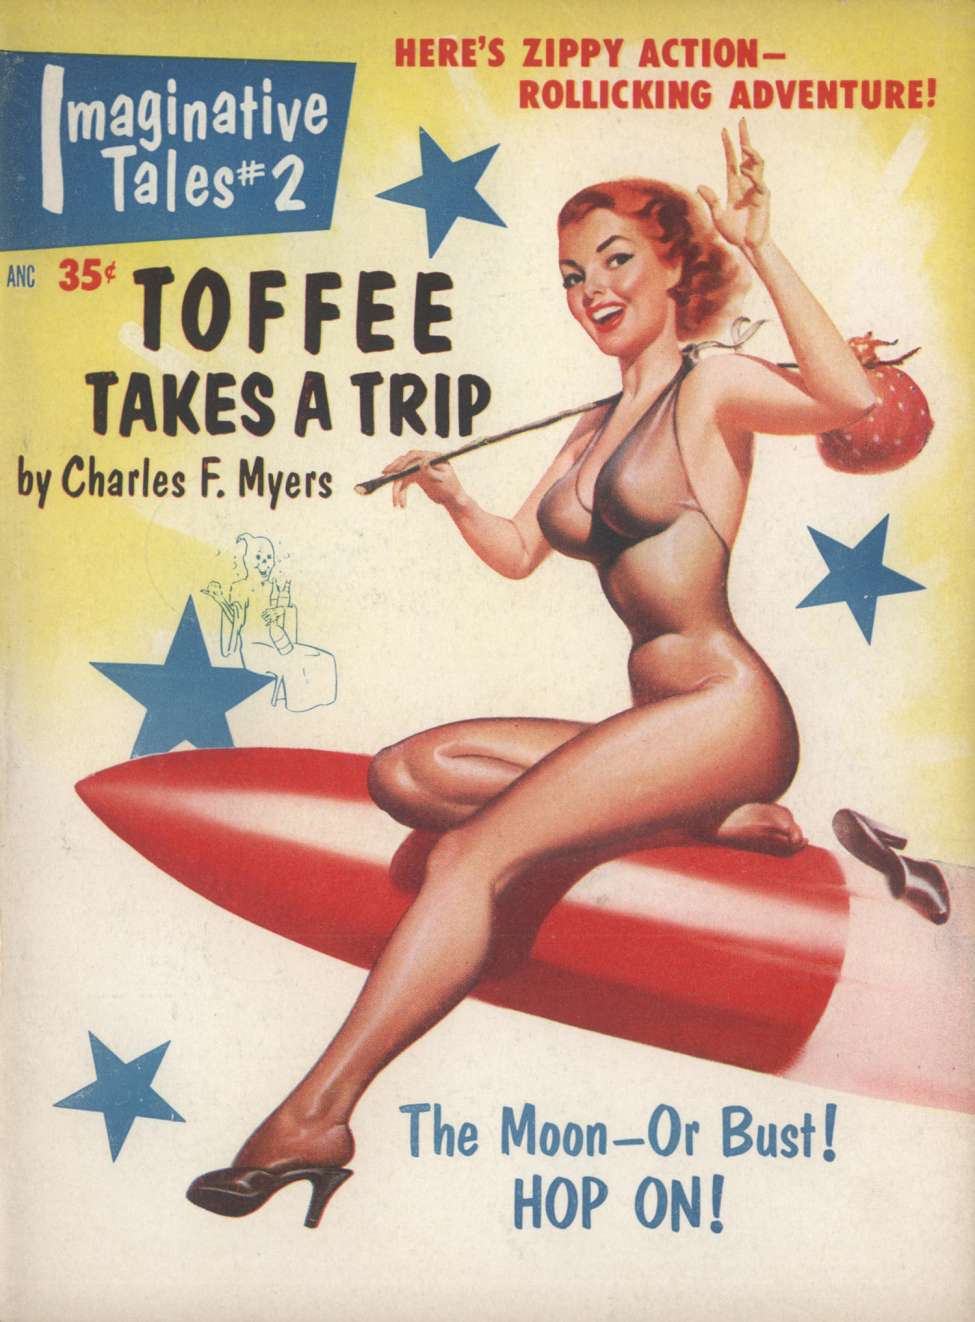 Comic Book Cover For Imaginative Tales v1 2 - Toffee Takes a Trip - Charles F. Myers